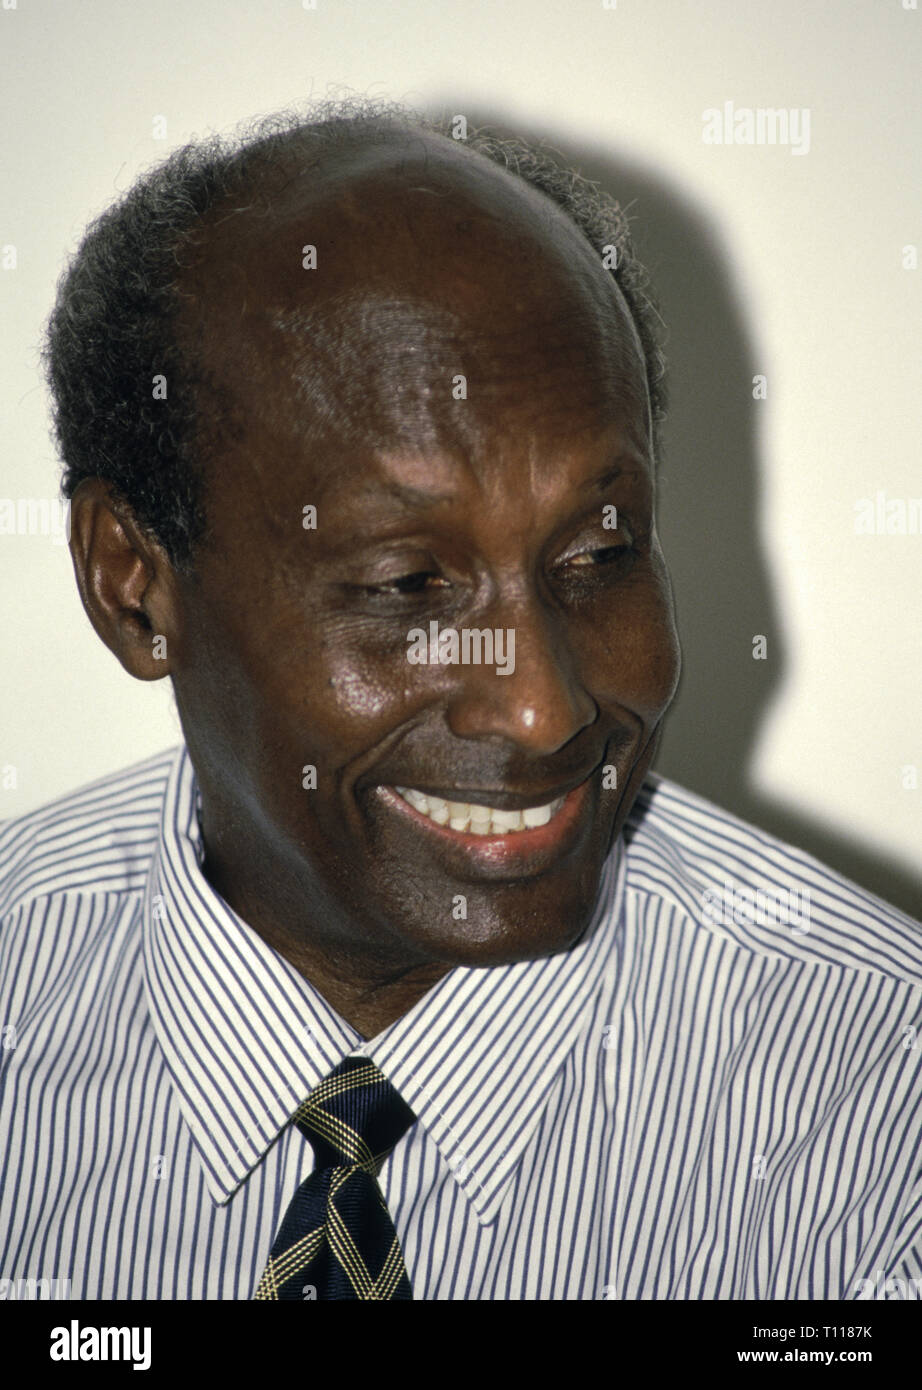 27th October 1993 General Mohamed Farah Aidid giving an impromptu press conference to the international media in Mogadishu, Somalia. Stock Photo